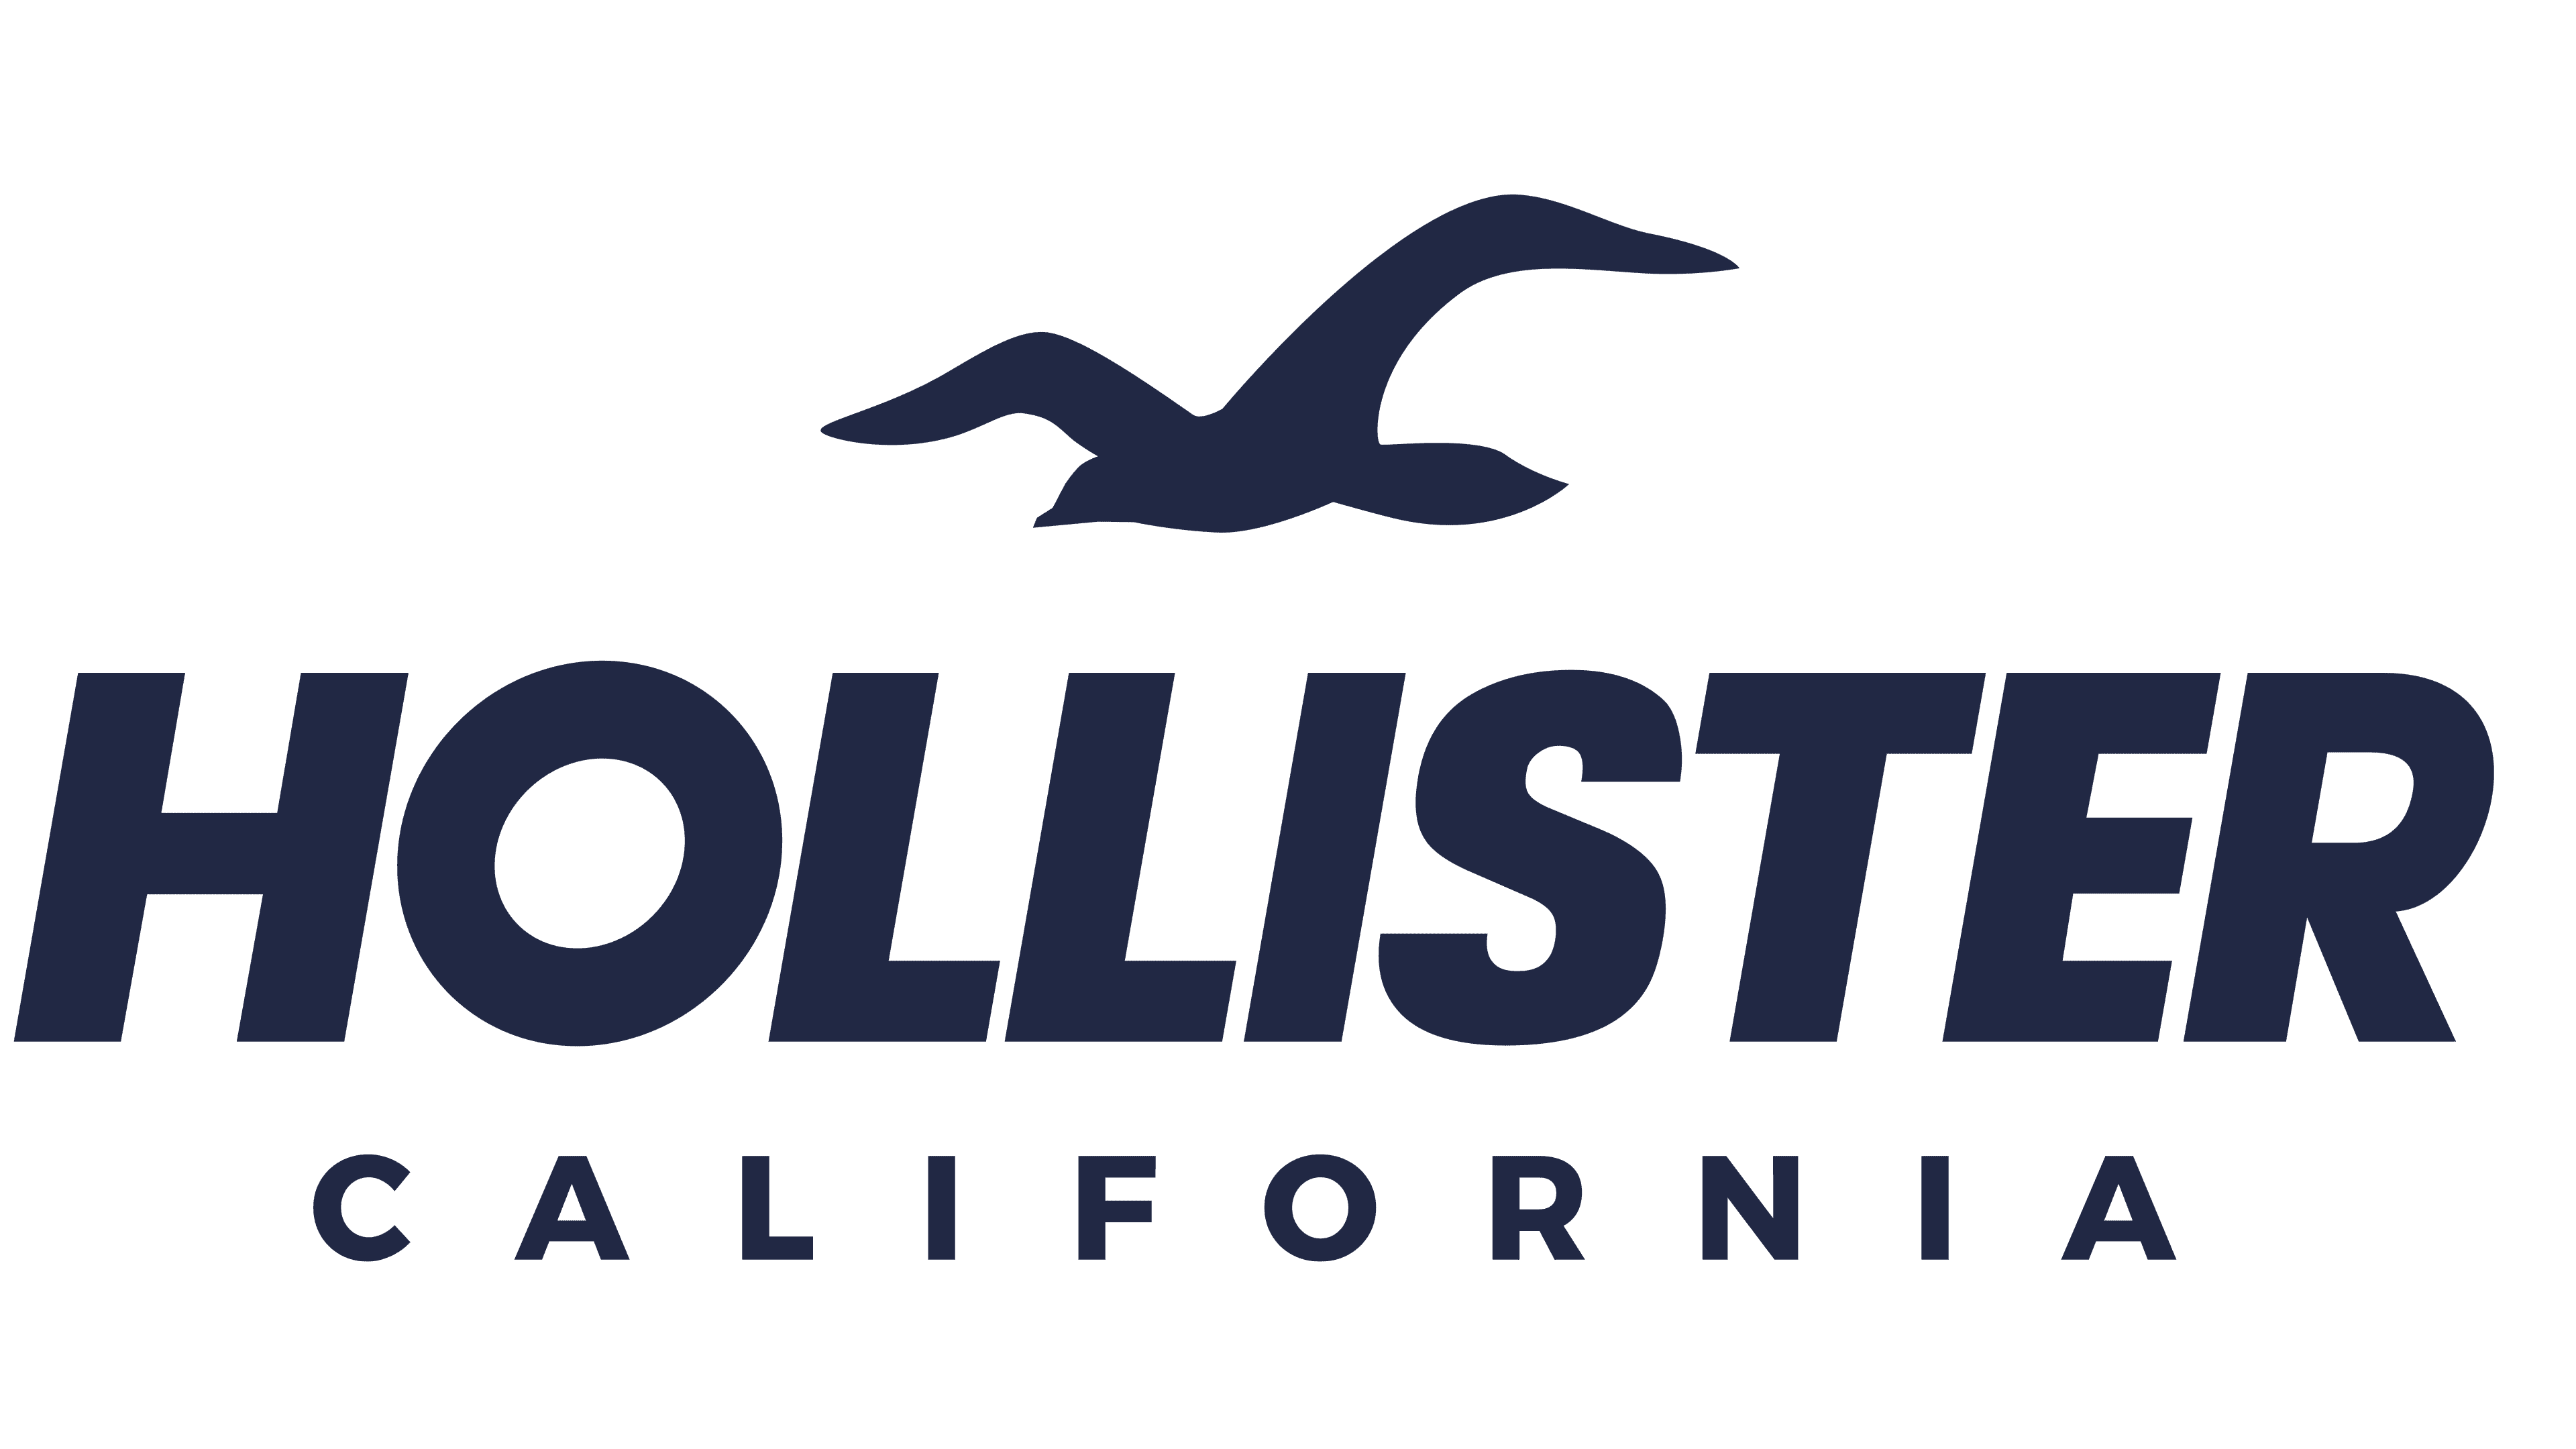 Hollister Logo | The most famous brands 